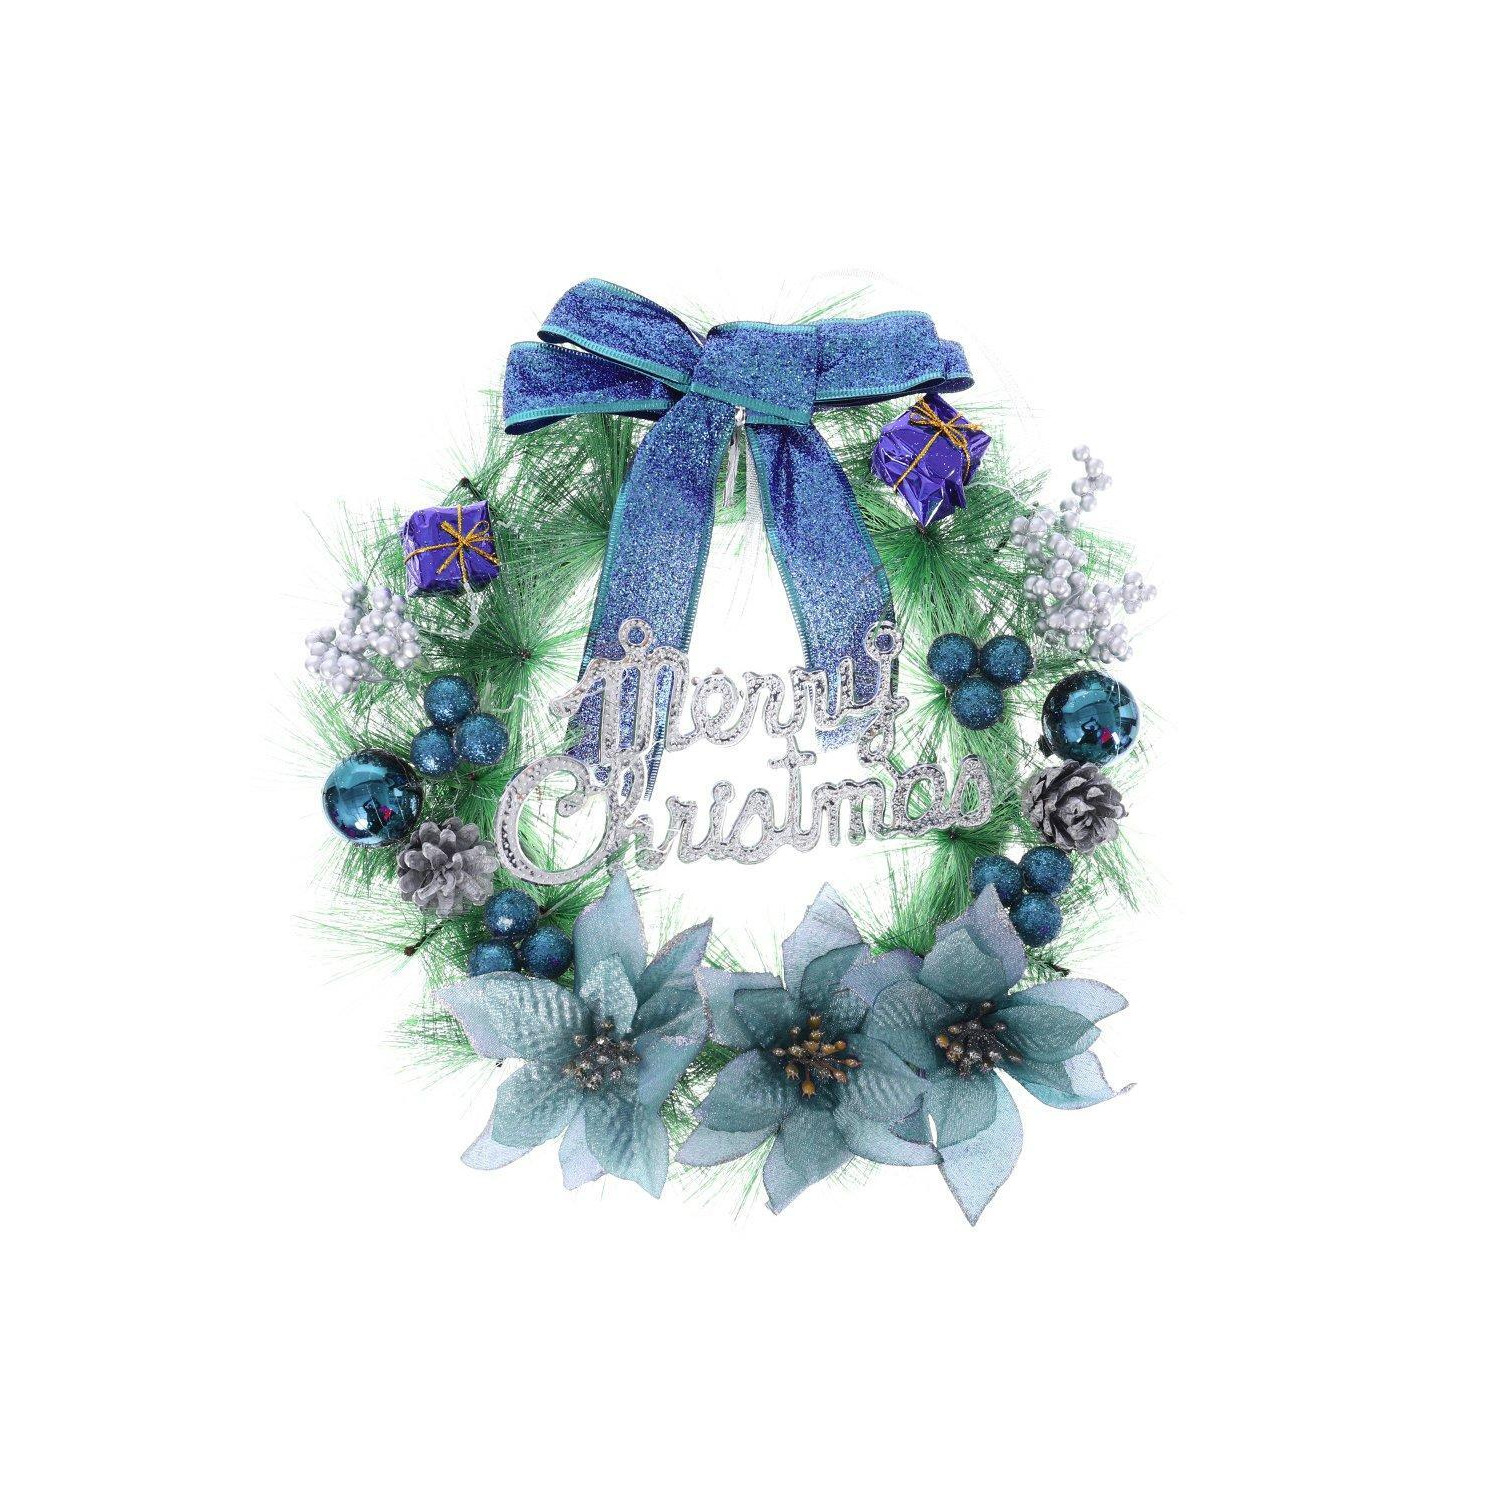 D30cm Elegant Christmas Wreath with Mixed Decorations - image 1